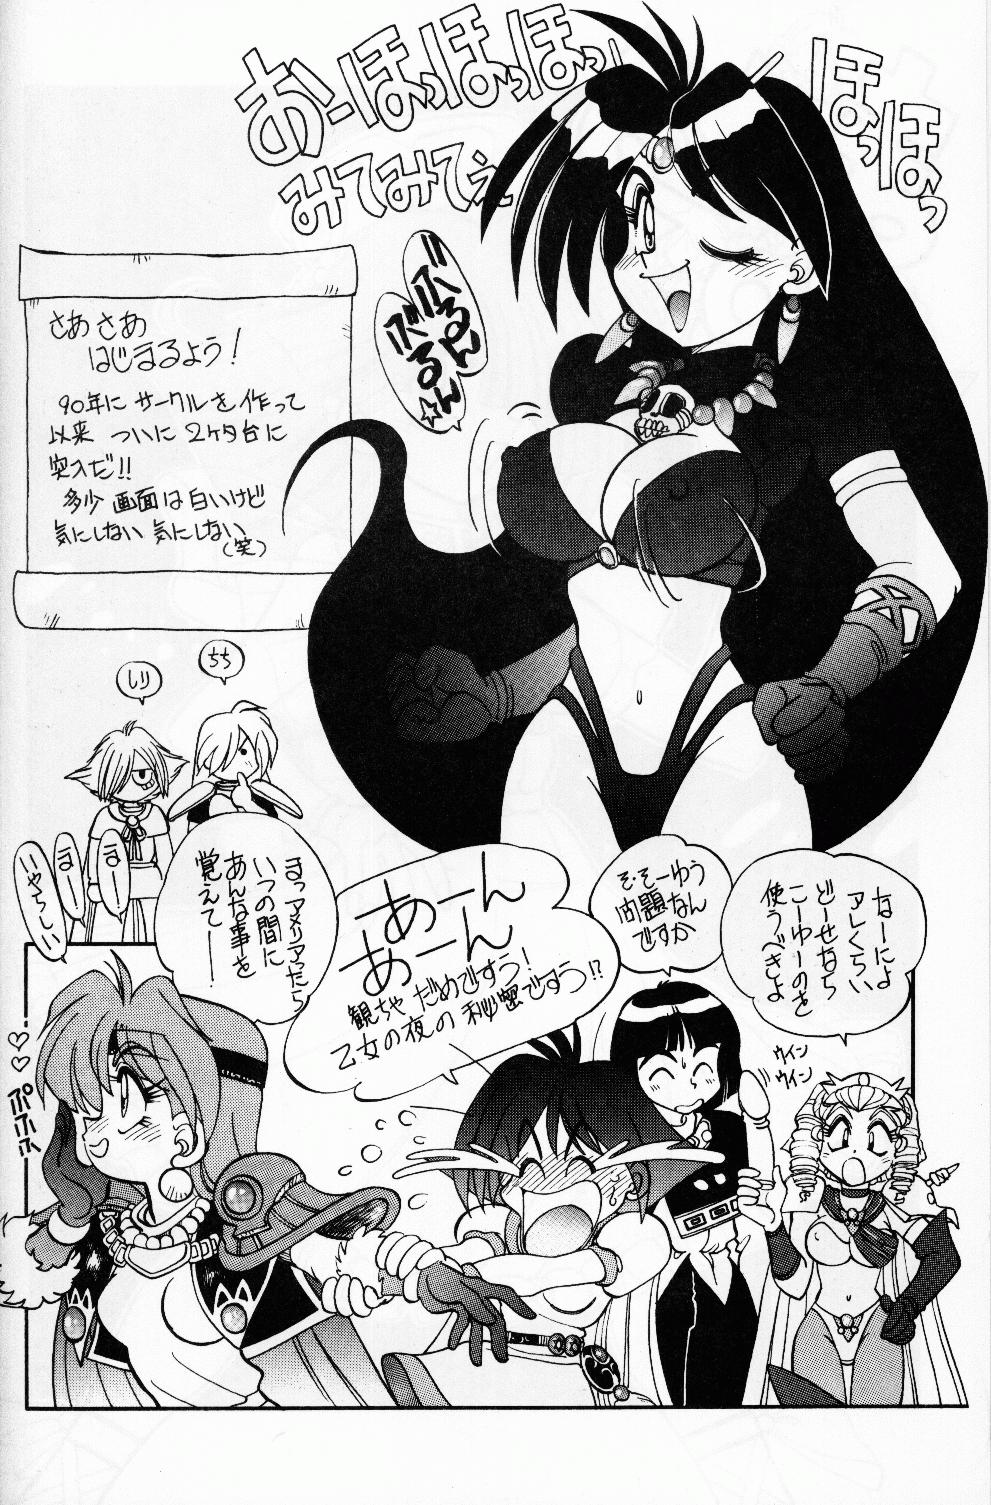 Tanned Mantou 10 - Slayers Asians - Page 4